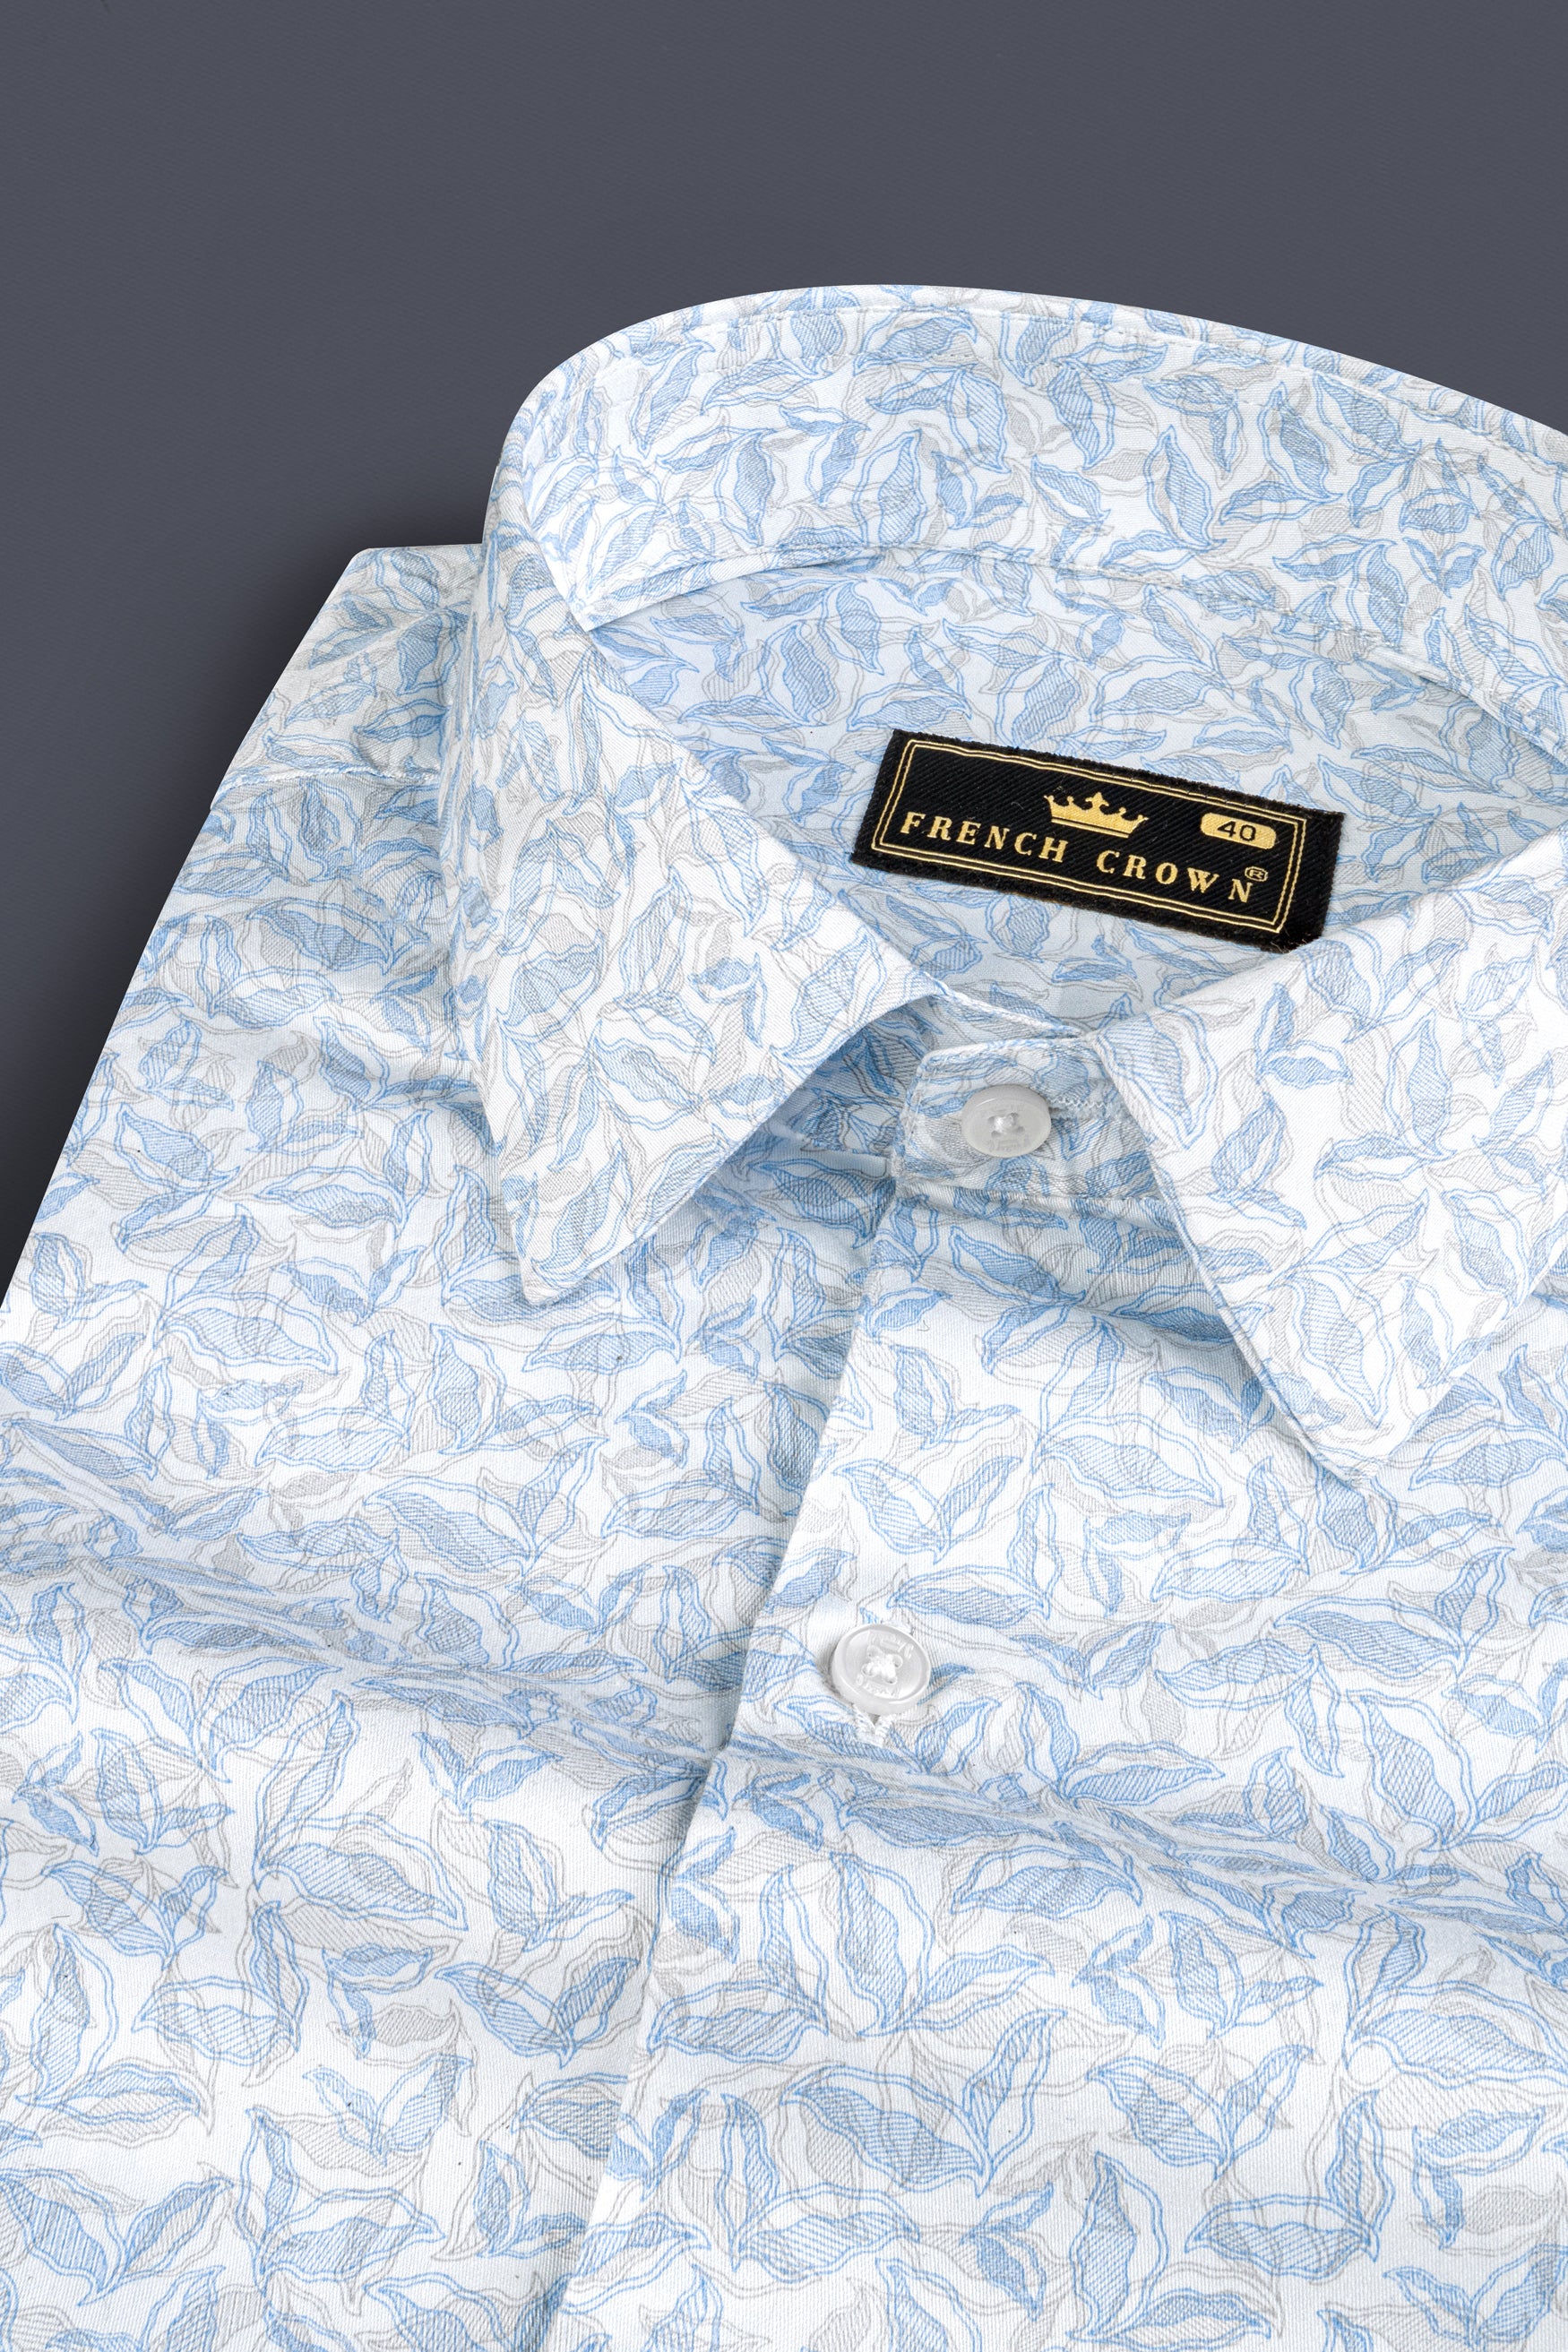 Bright white with Brown and Blue Leaves Printed Super soft Premium Cotton Shirt